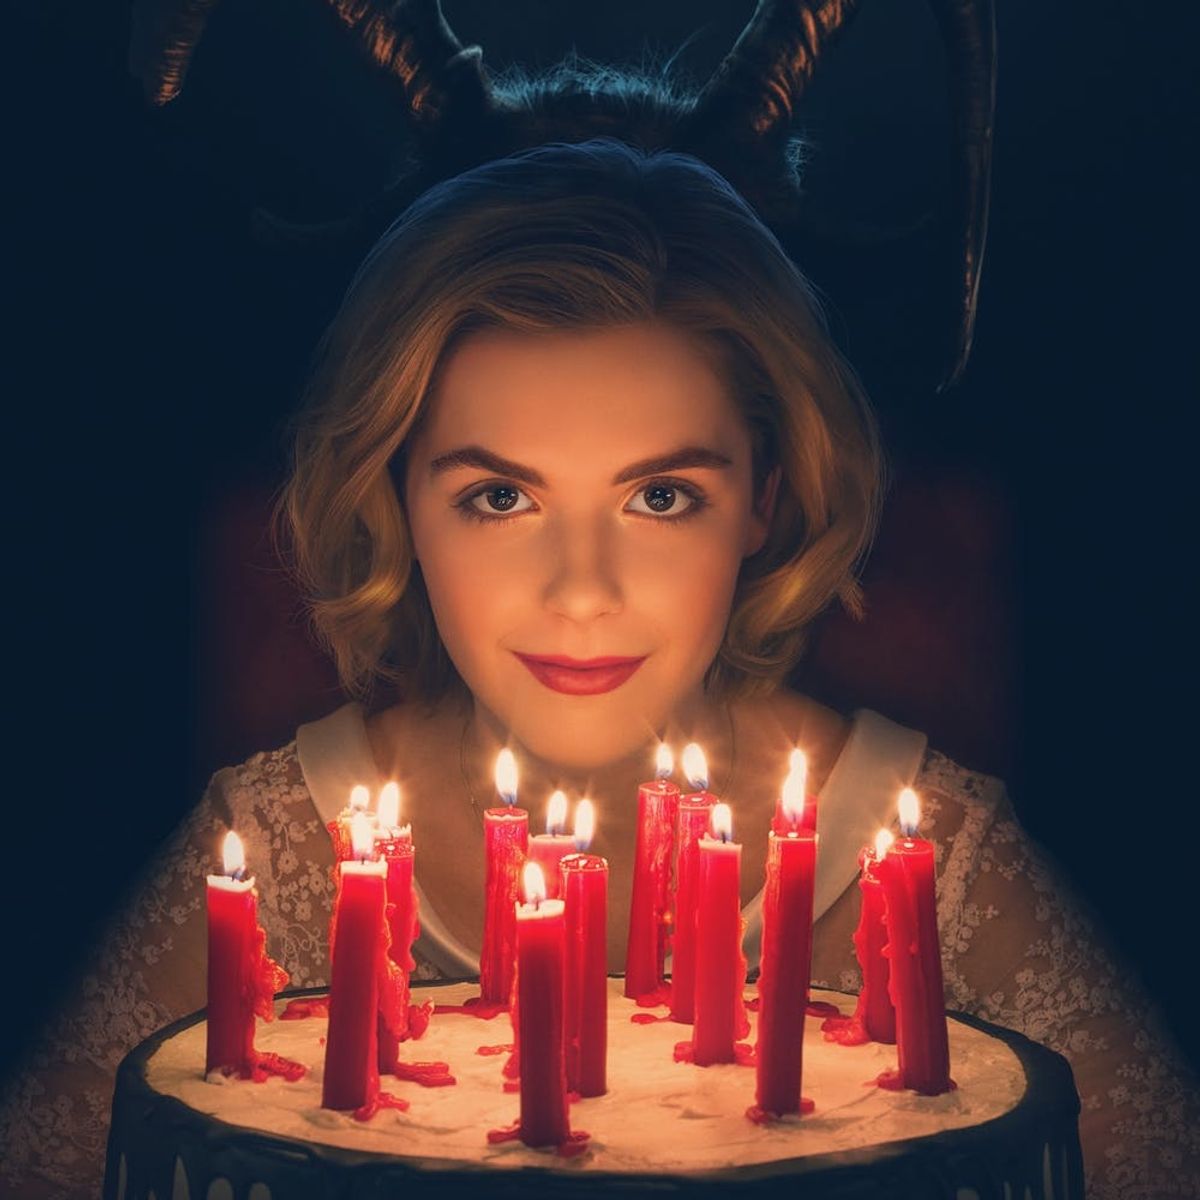 The First ‘Chilling Adventures of Sabrina’ Trailer Lives Up to Its ‘Chilling’ Title